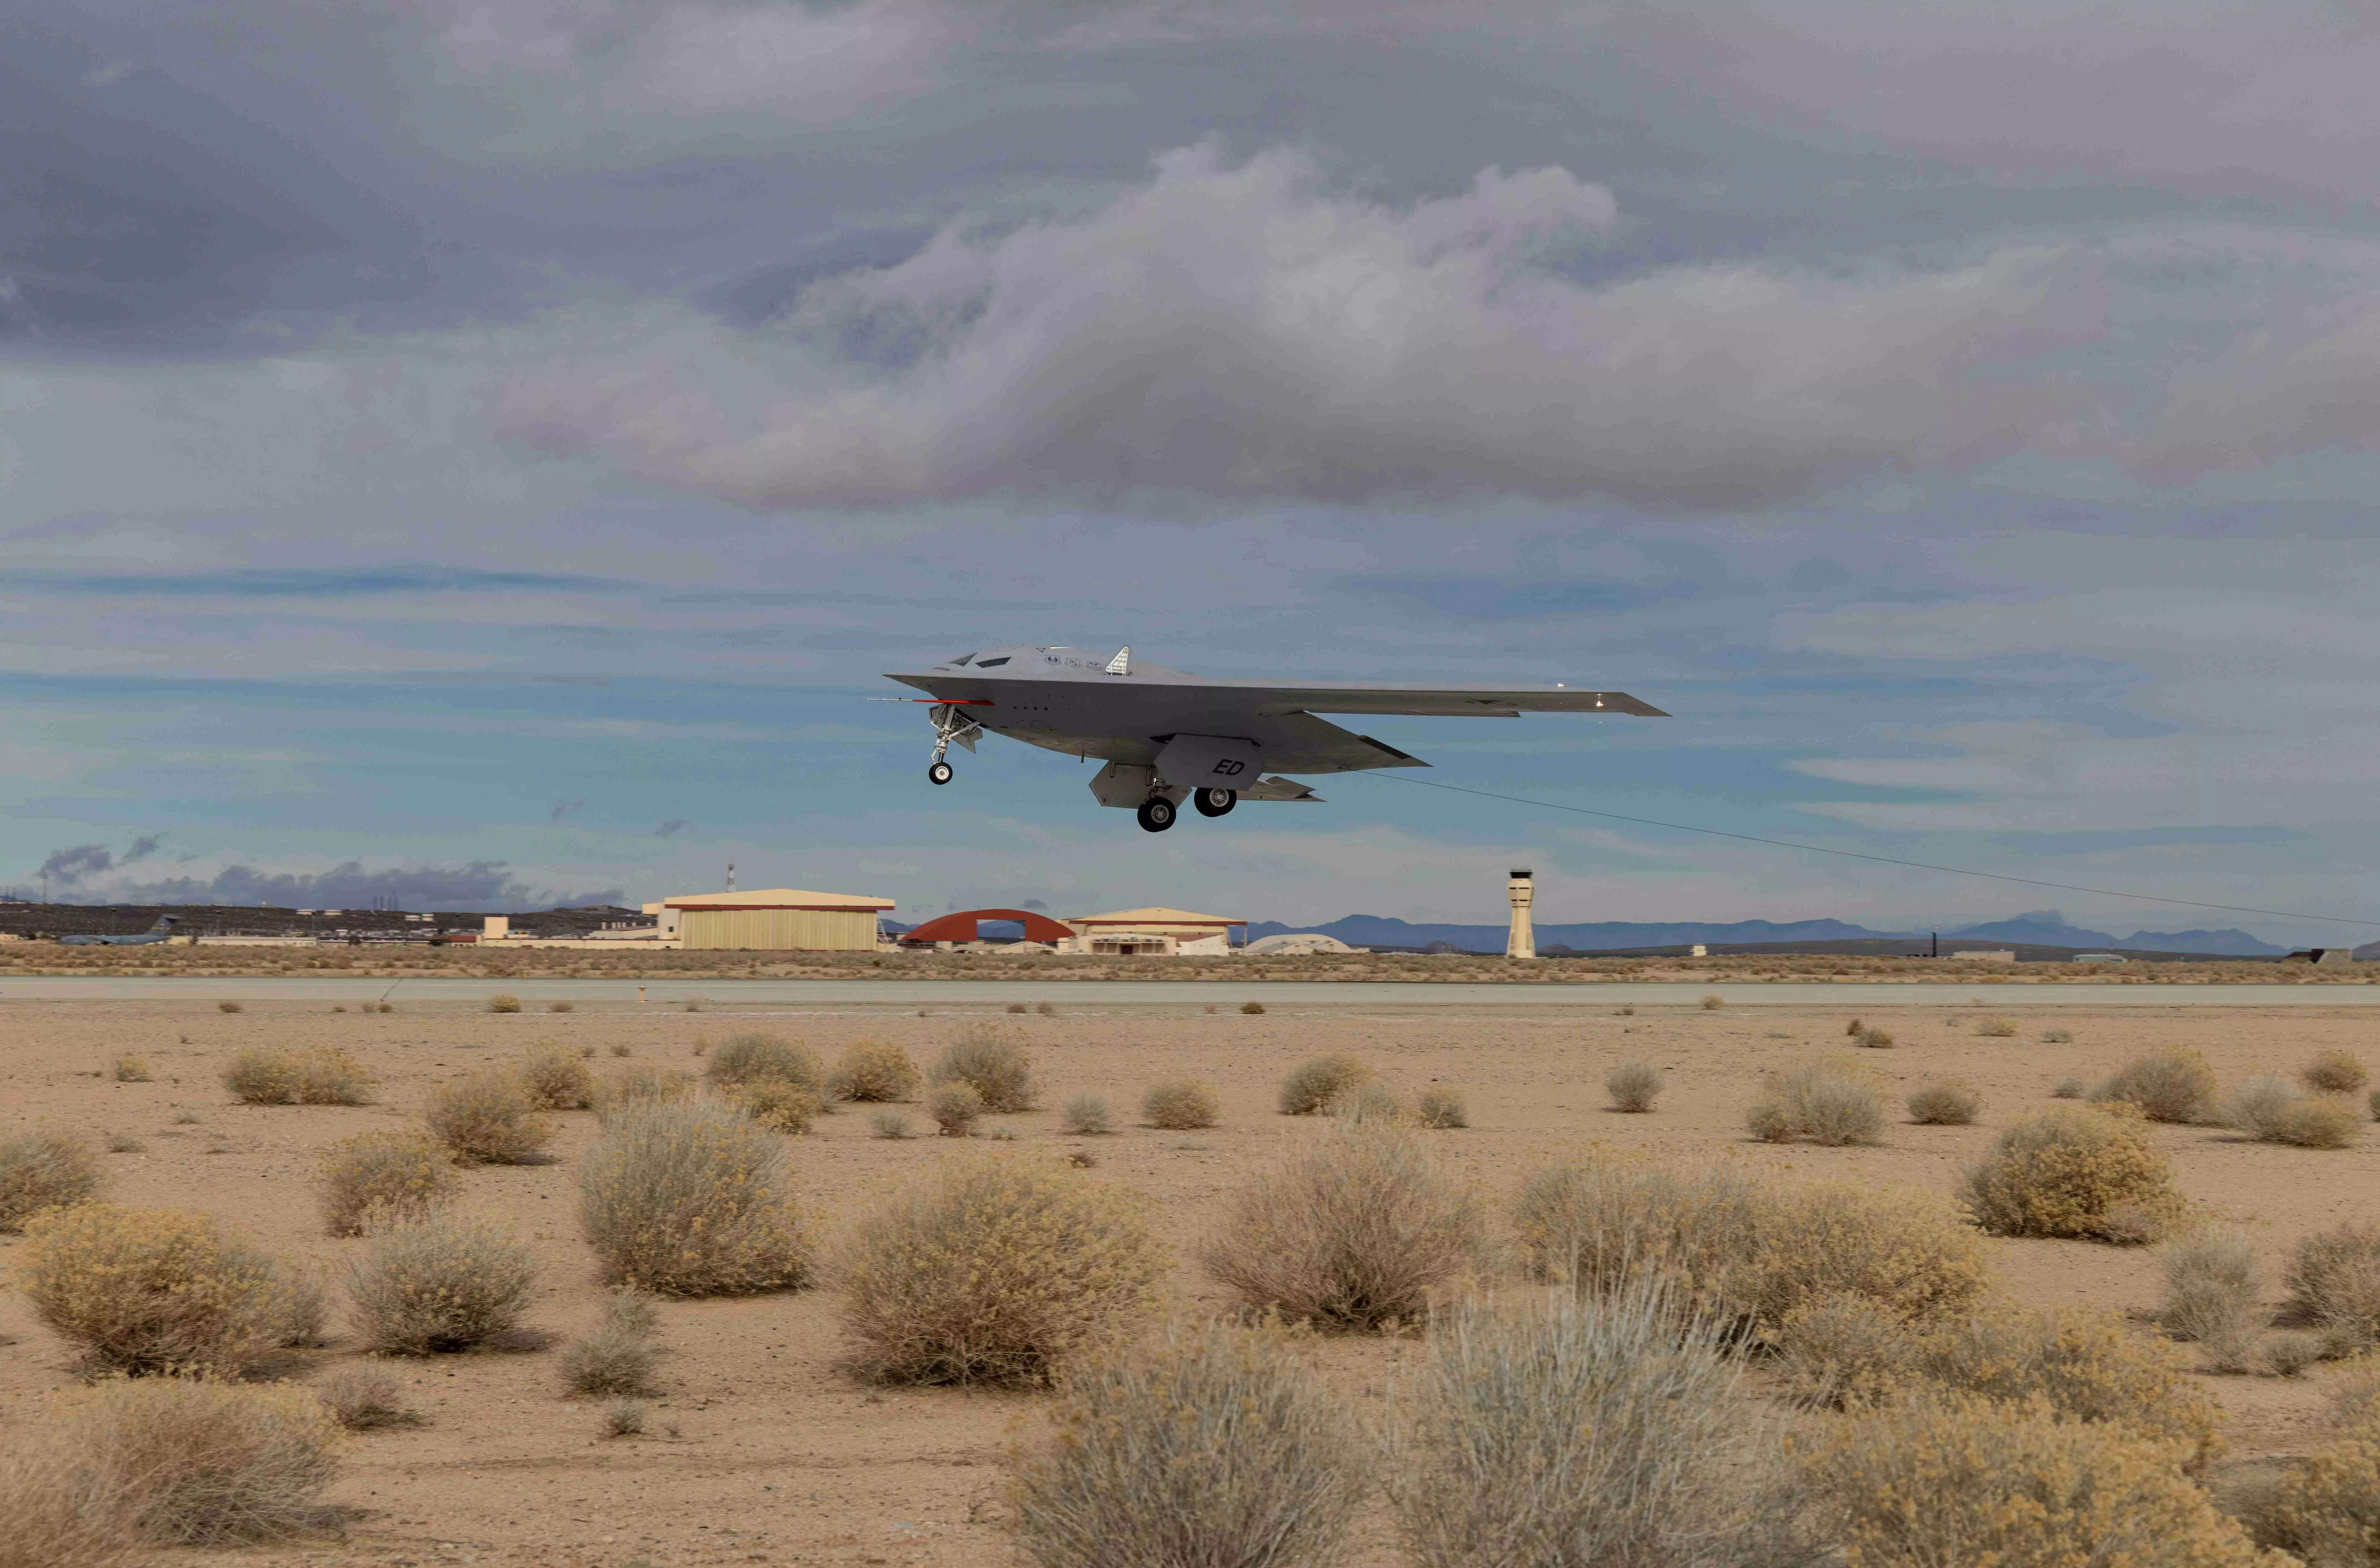 A B-21 Raider conducts flight tests, which includes ground testing, taxiing, and flying operations, at Edwards Air Force Base, California.